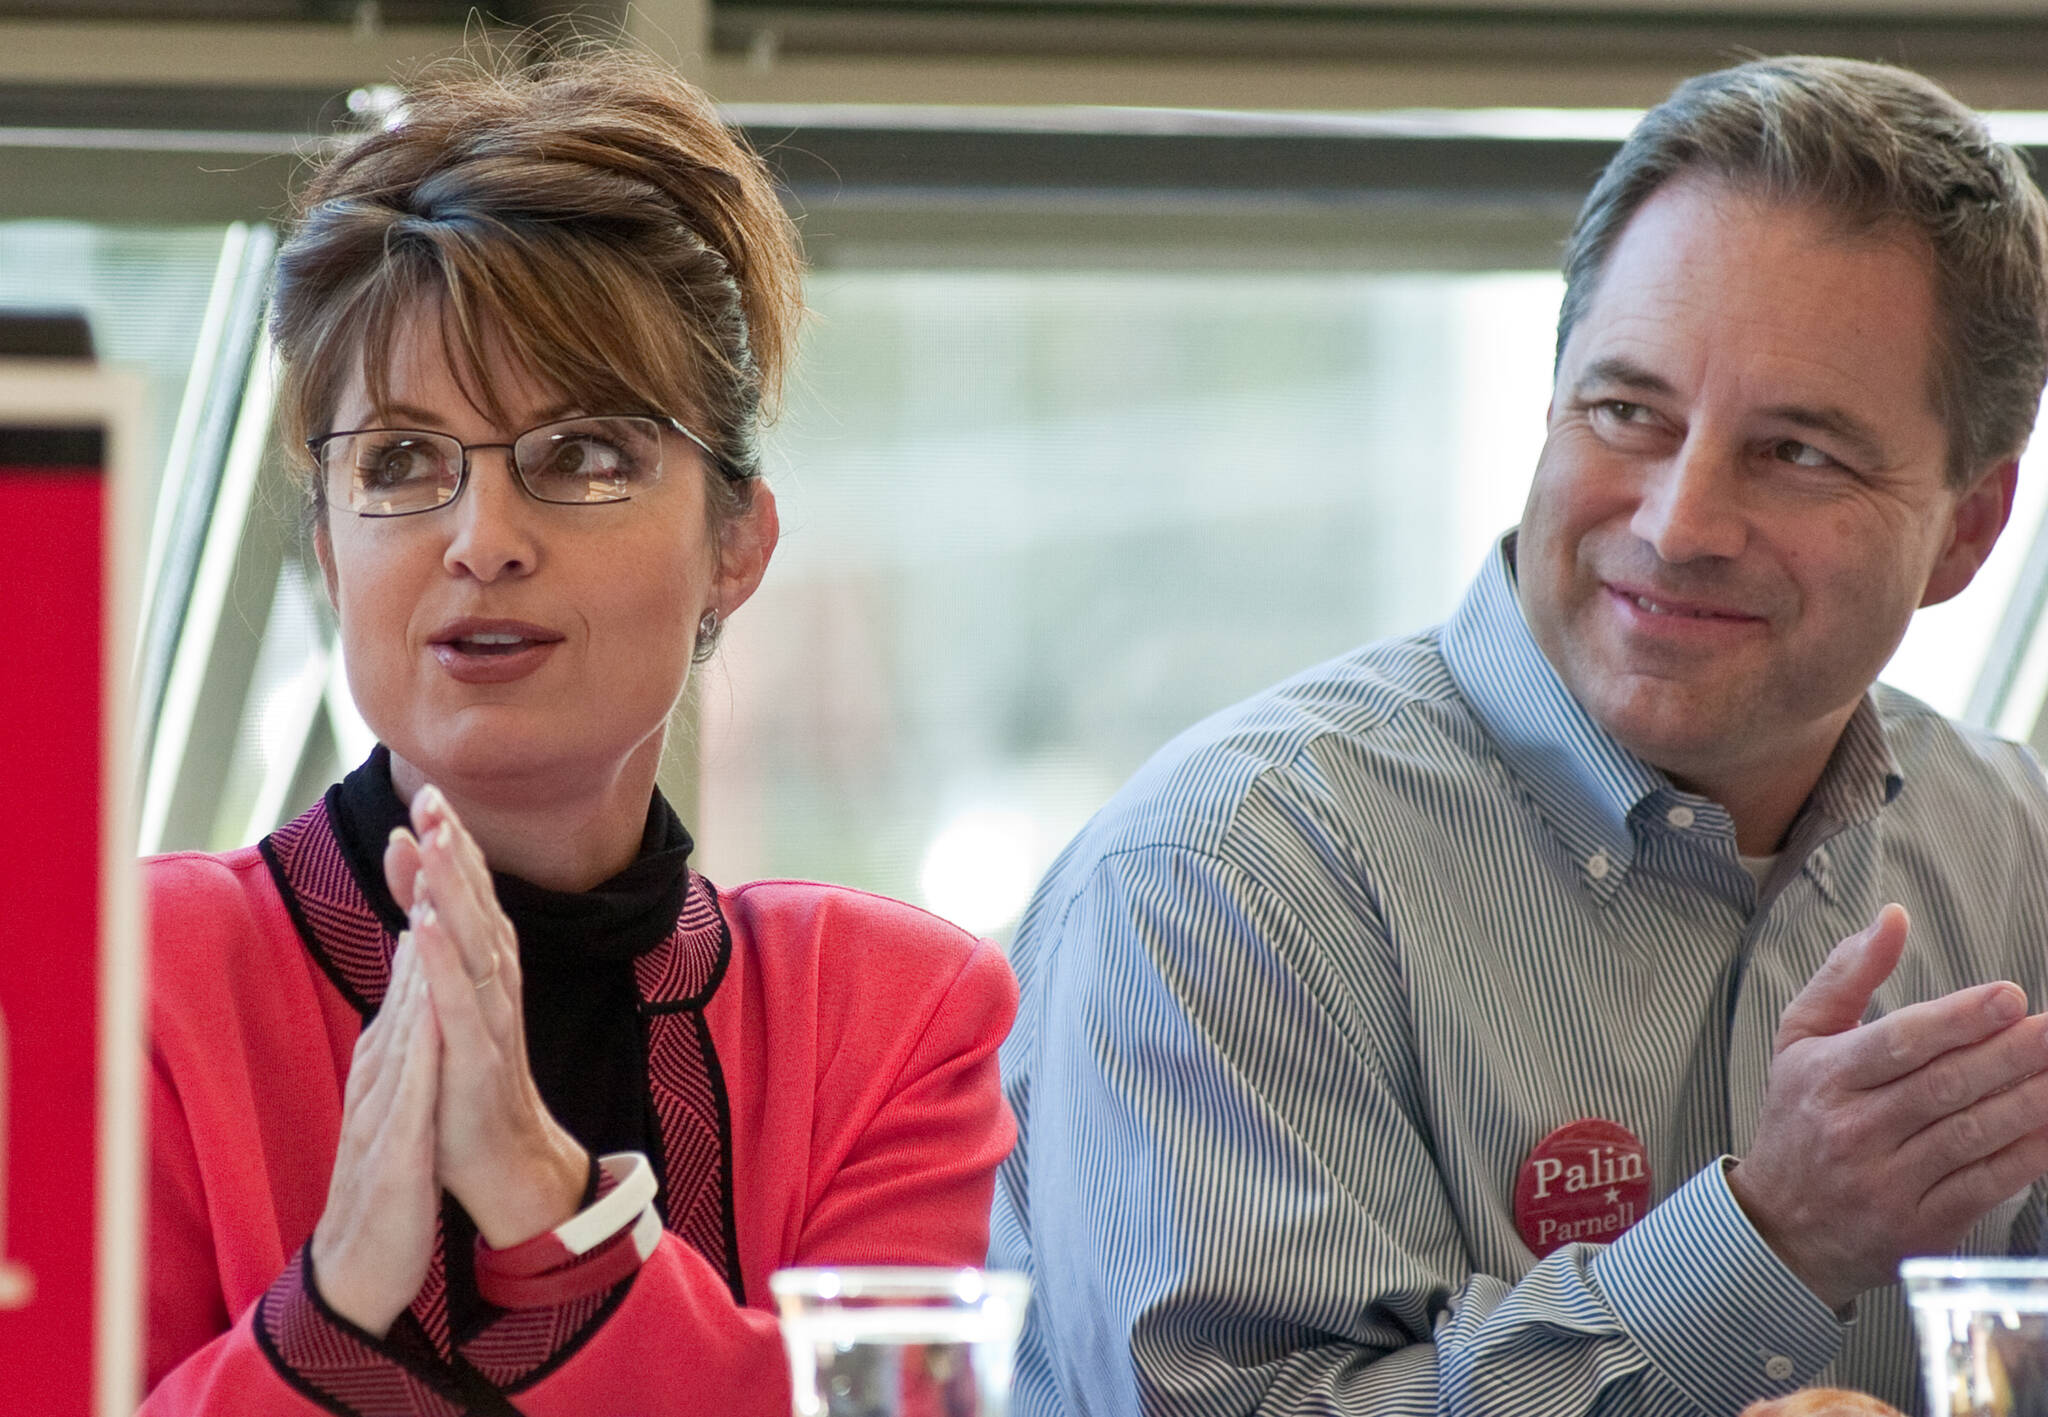 Then-canidate for governor Sarah Palin and running mate Sean Parnell listen to introductions during a Capital City Republican Women's luncheon at the UAS Recreation Center in September 2006. (Michael Penn / Juneau Empire File)